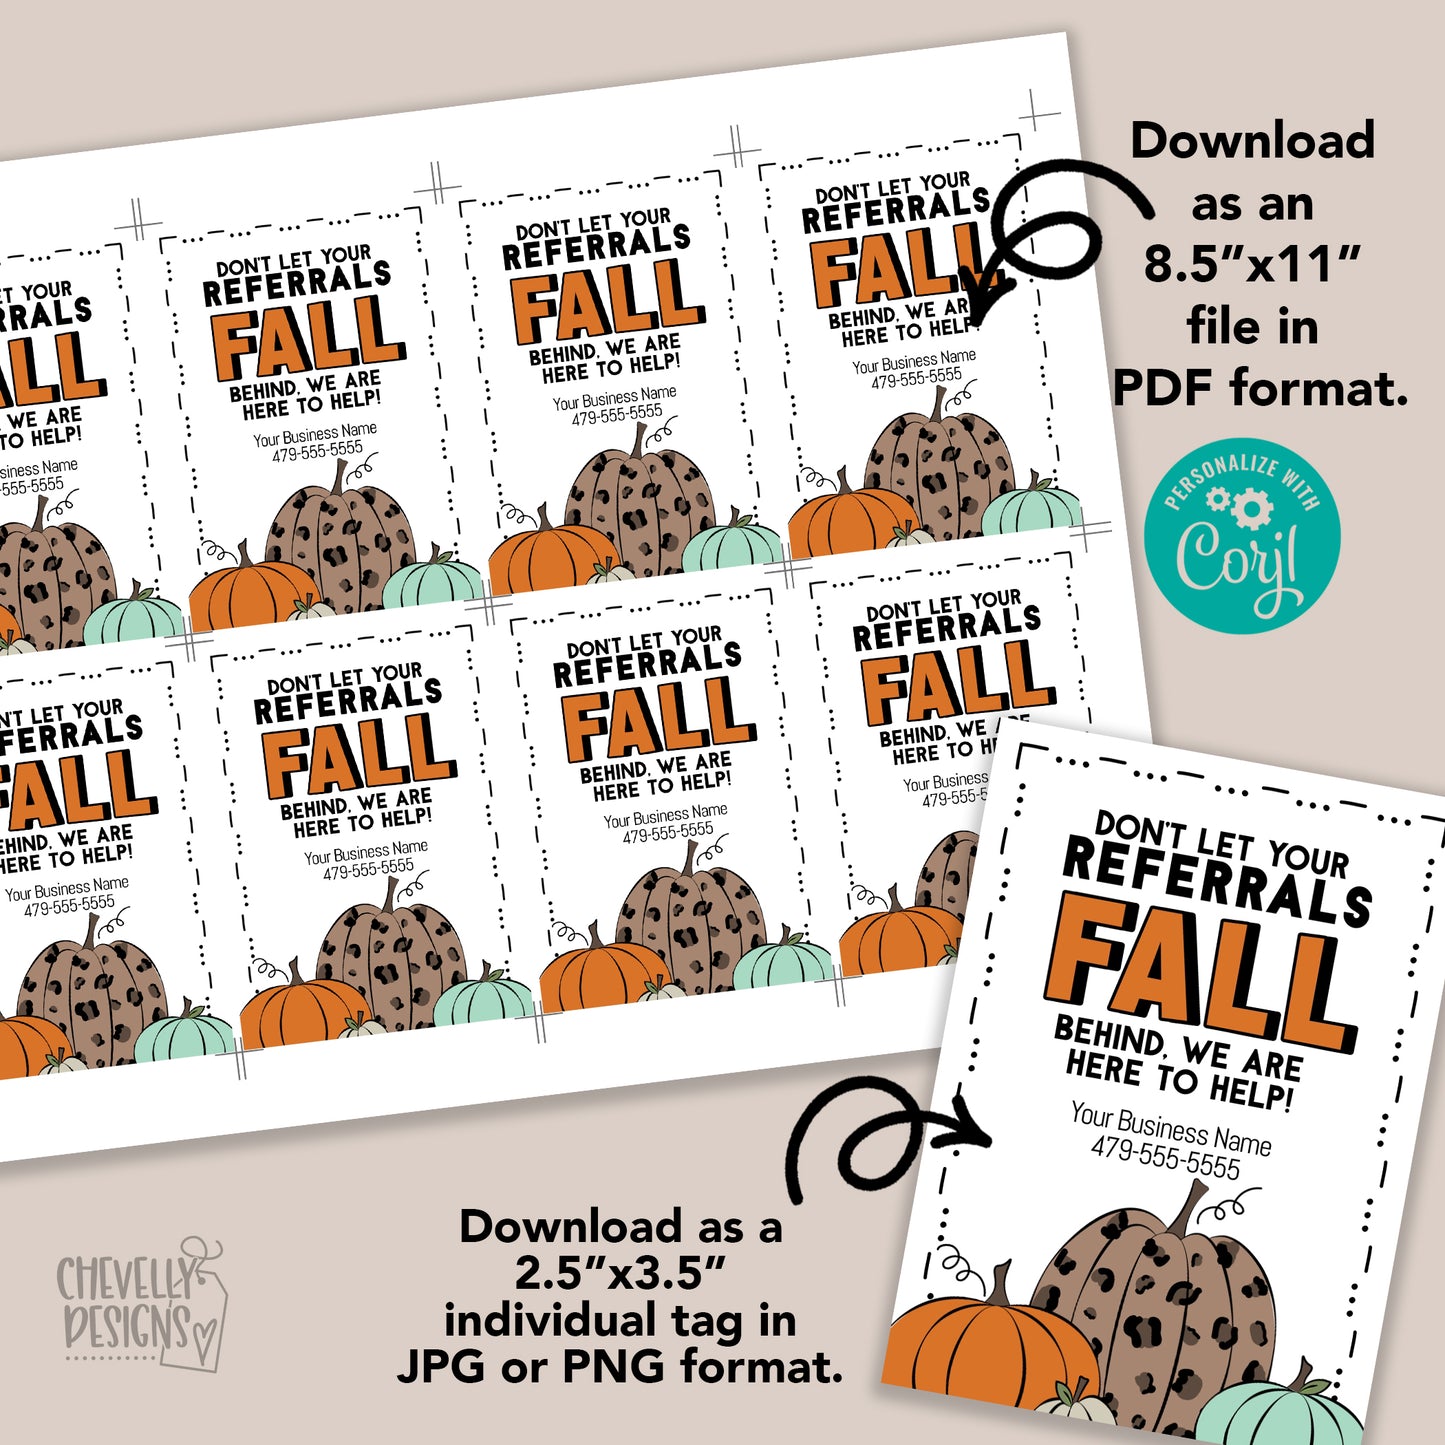 EDITABLE - Don't Let Your Referrals Fall Behind - Business Gift Tags - Printable Digital File